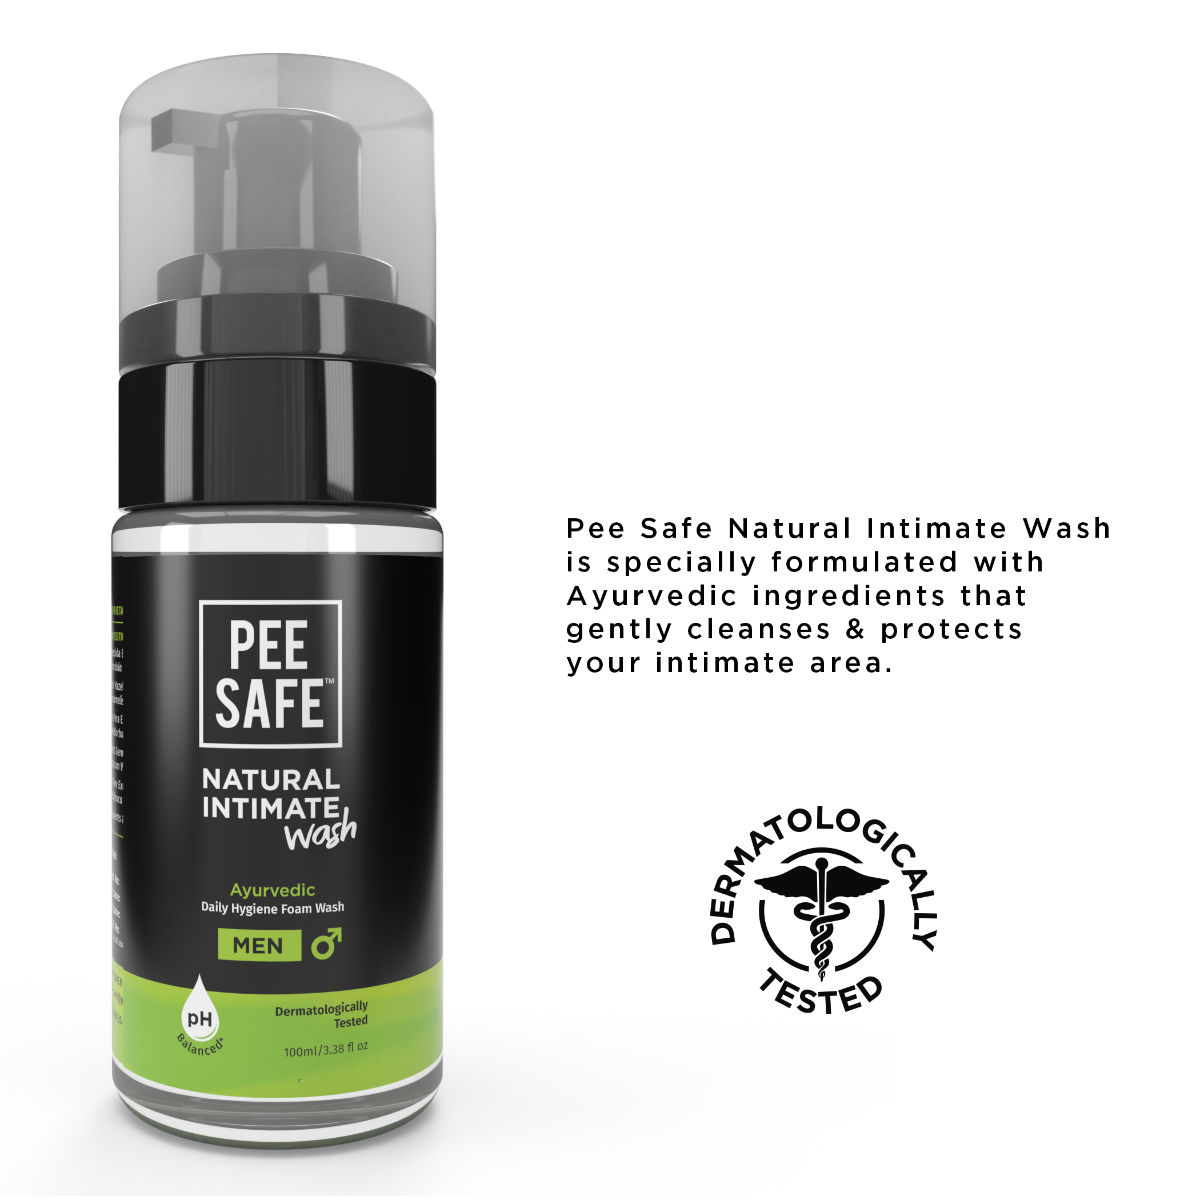 Pee Safe Natural Intimate Wash for Men, 100 ml, Pack of 1 